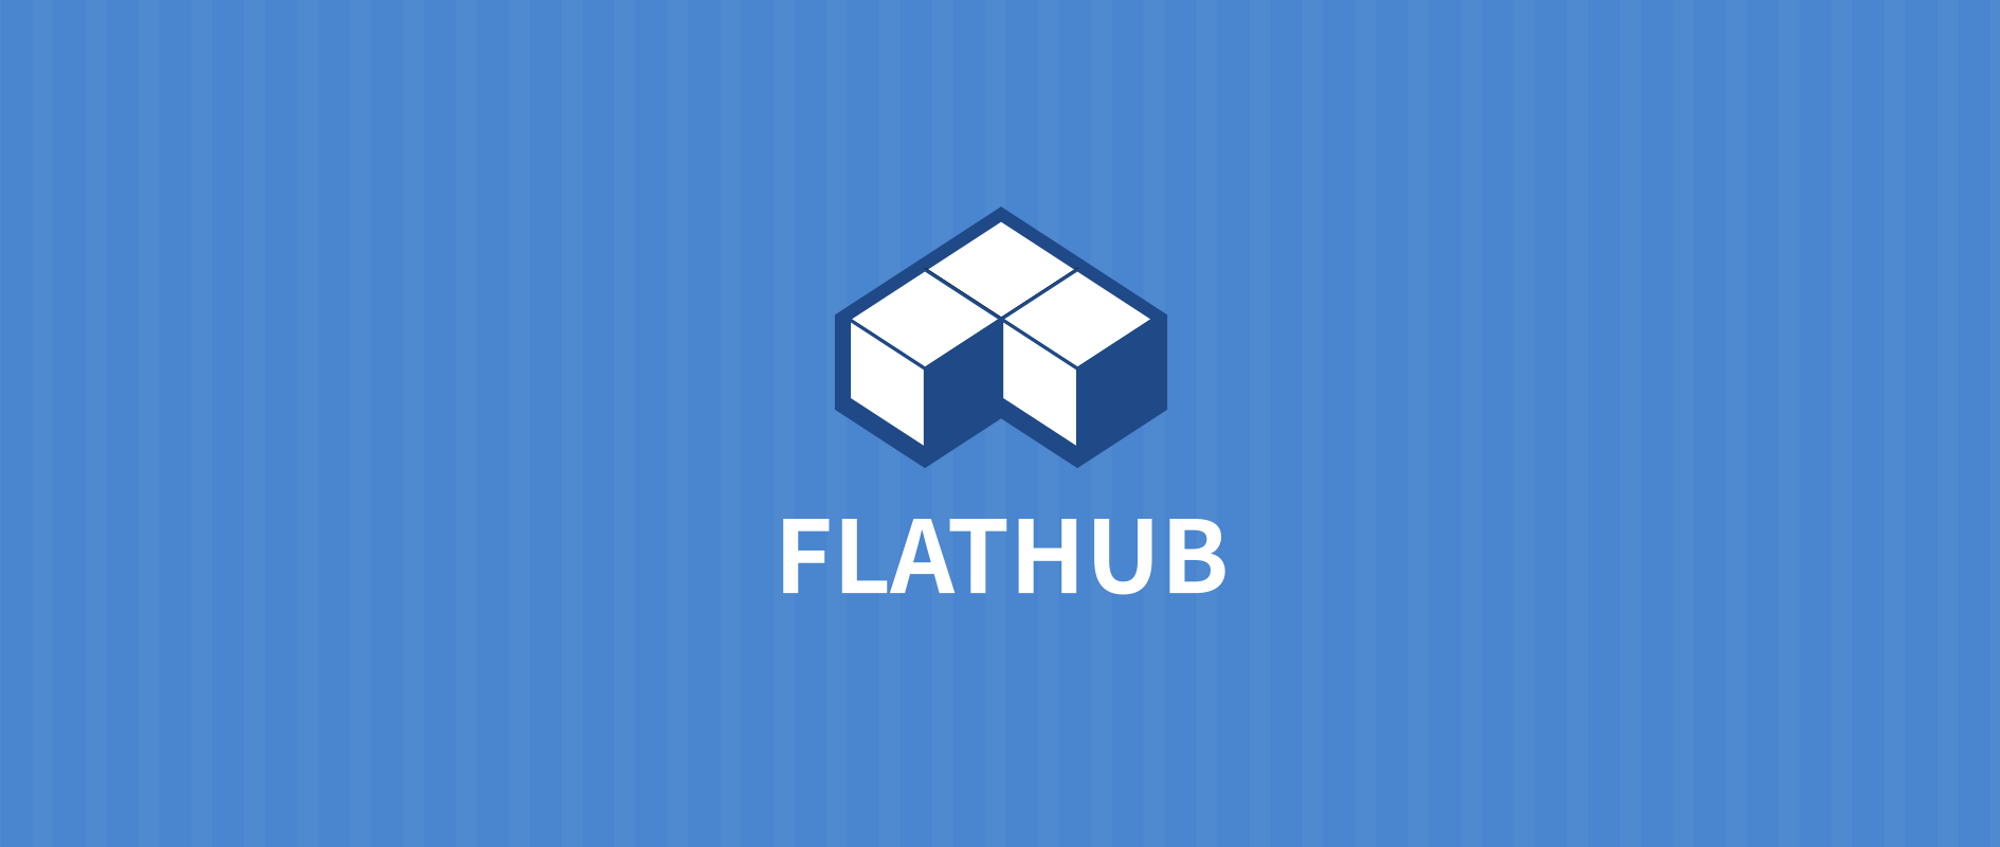 Flatpak could become a universal app store for Linux systems